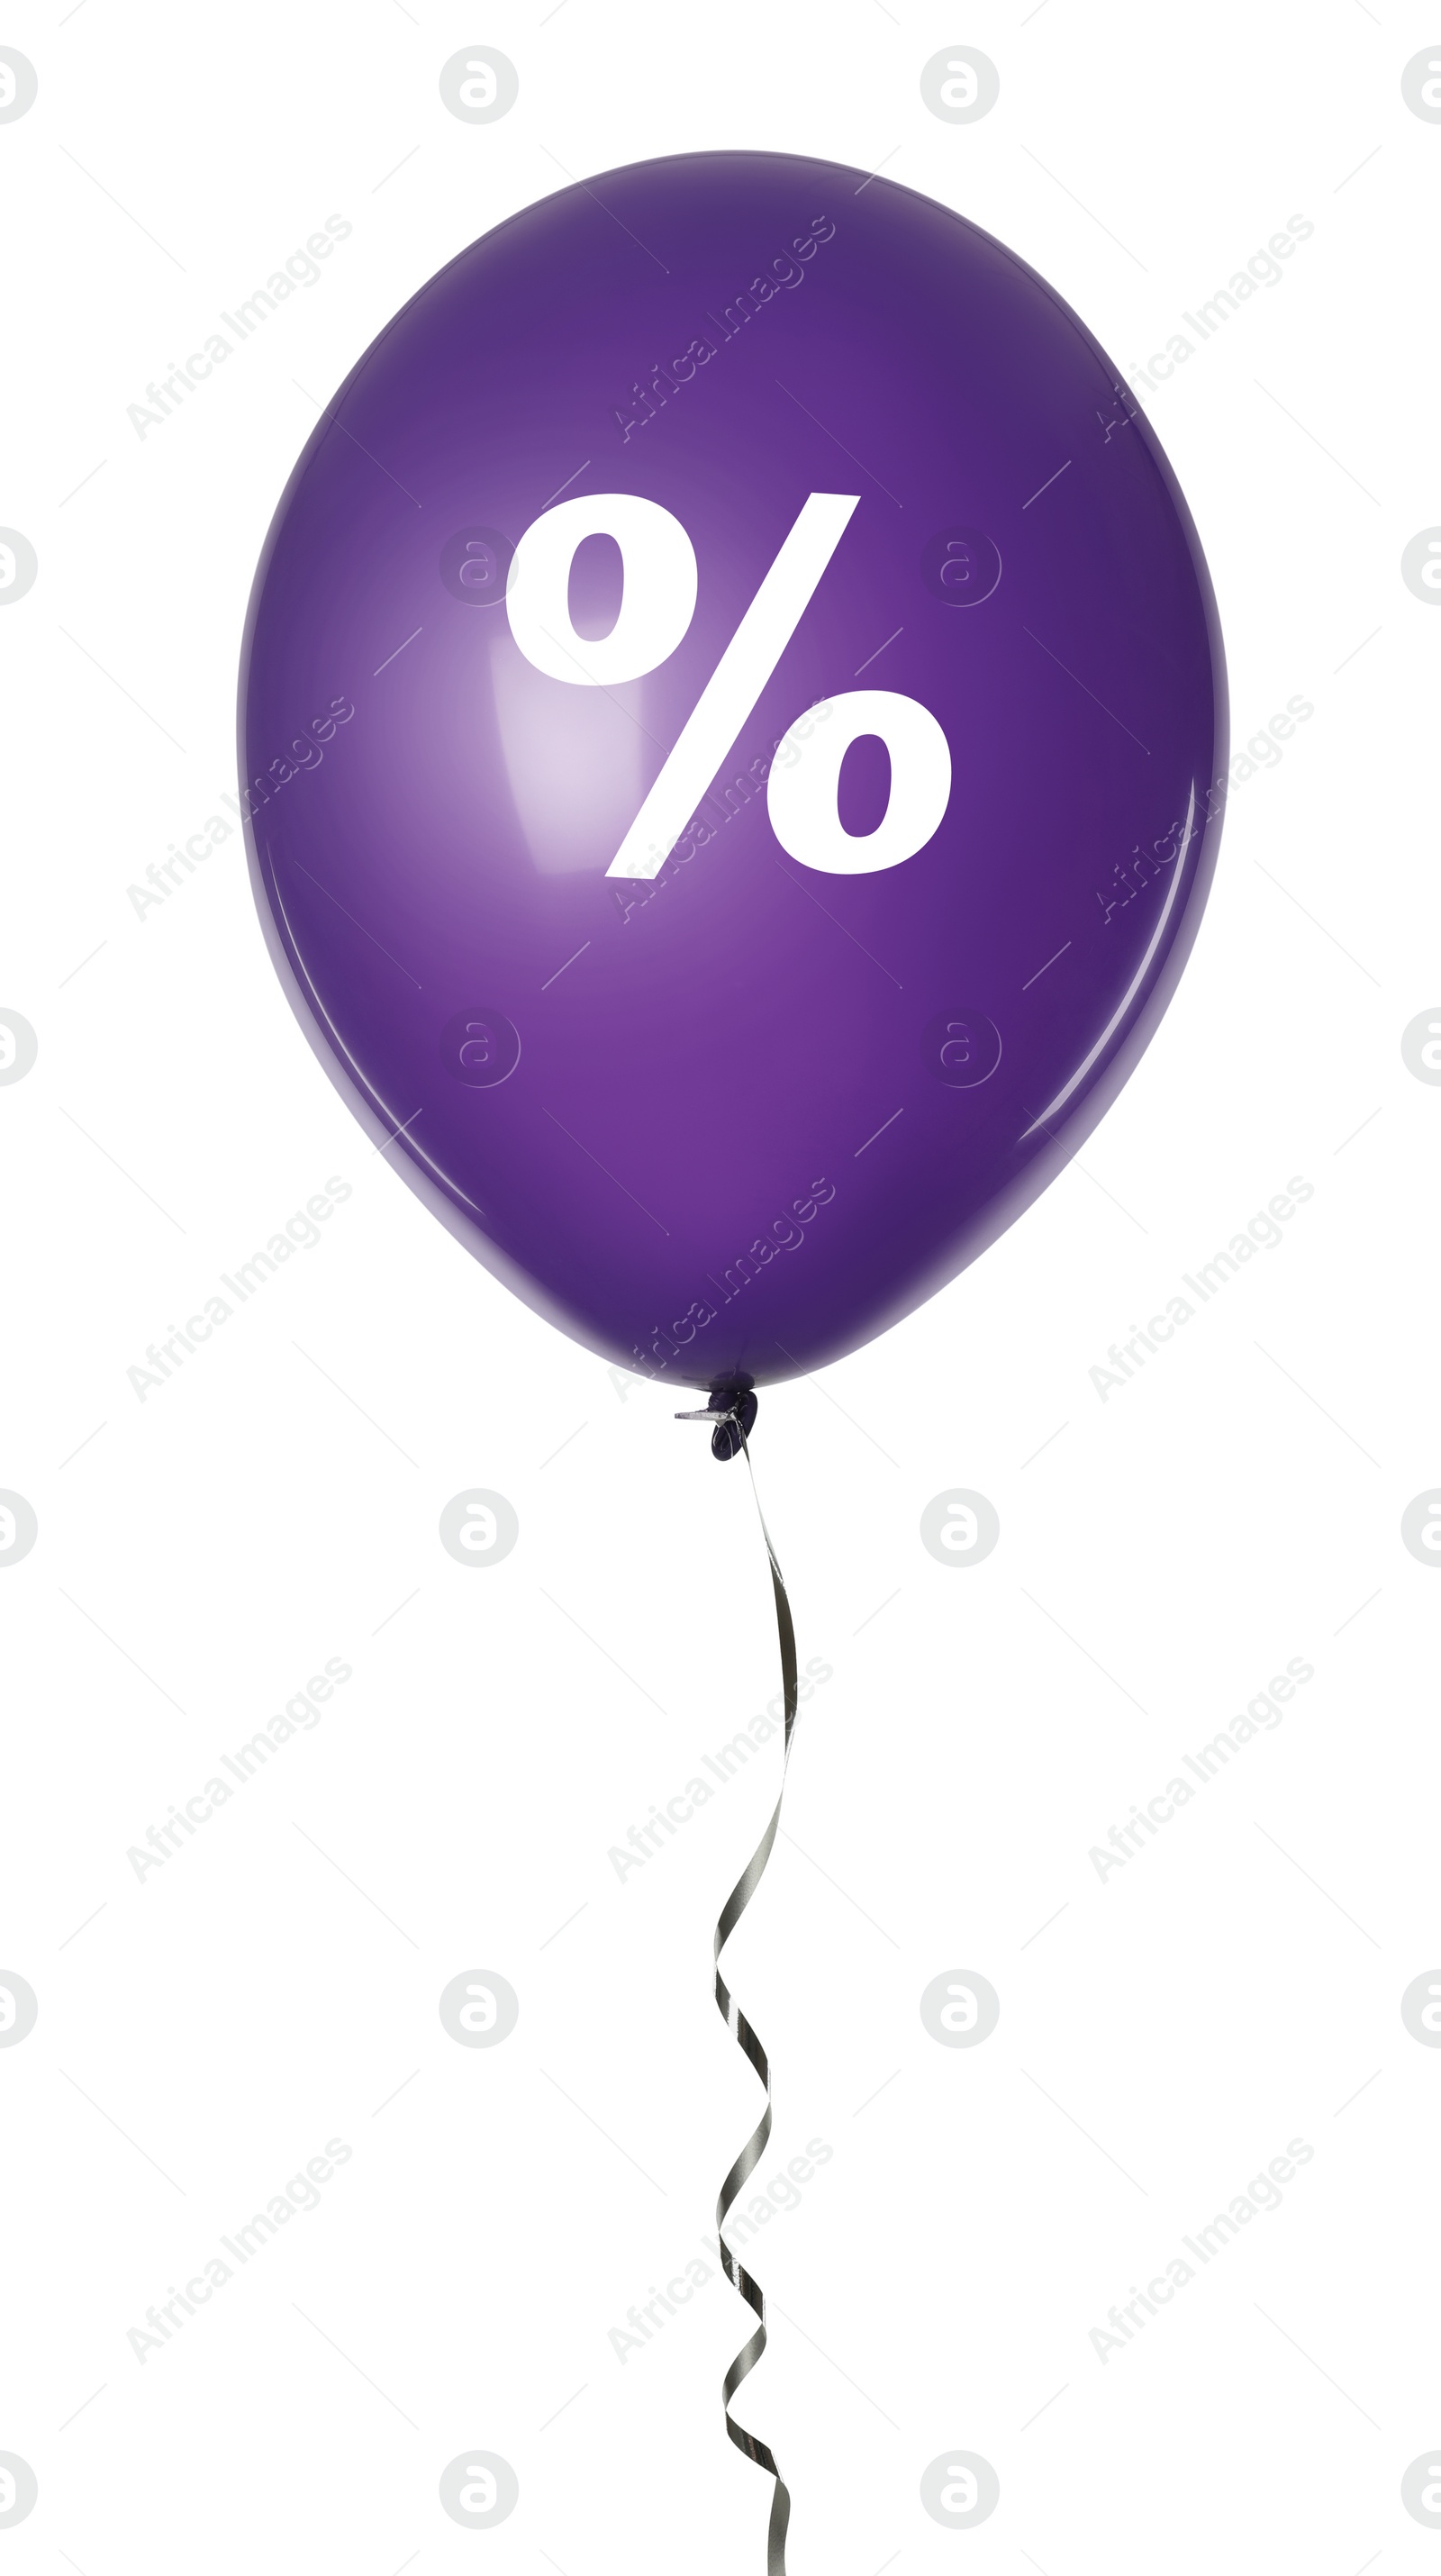 Image of Discount offer. Purple balloon with percent sign on white background